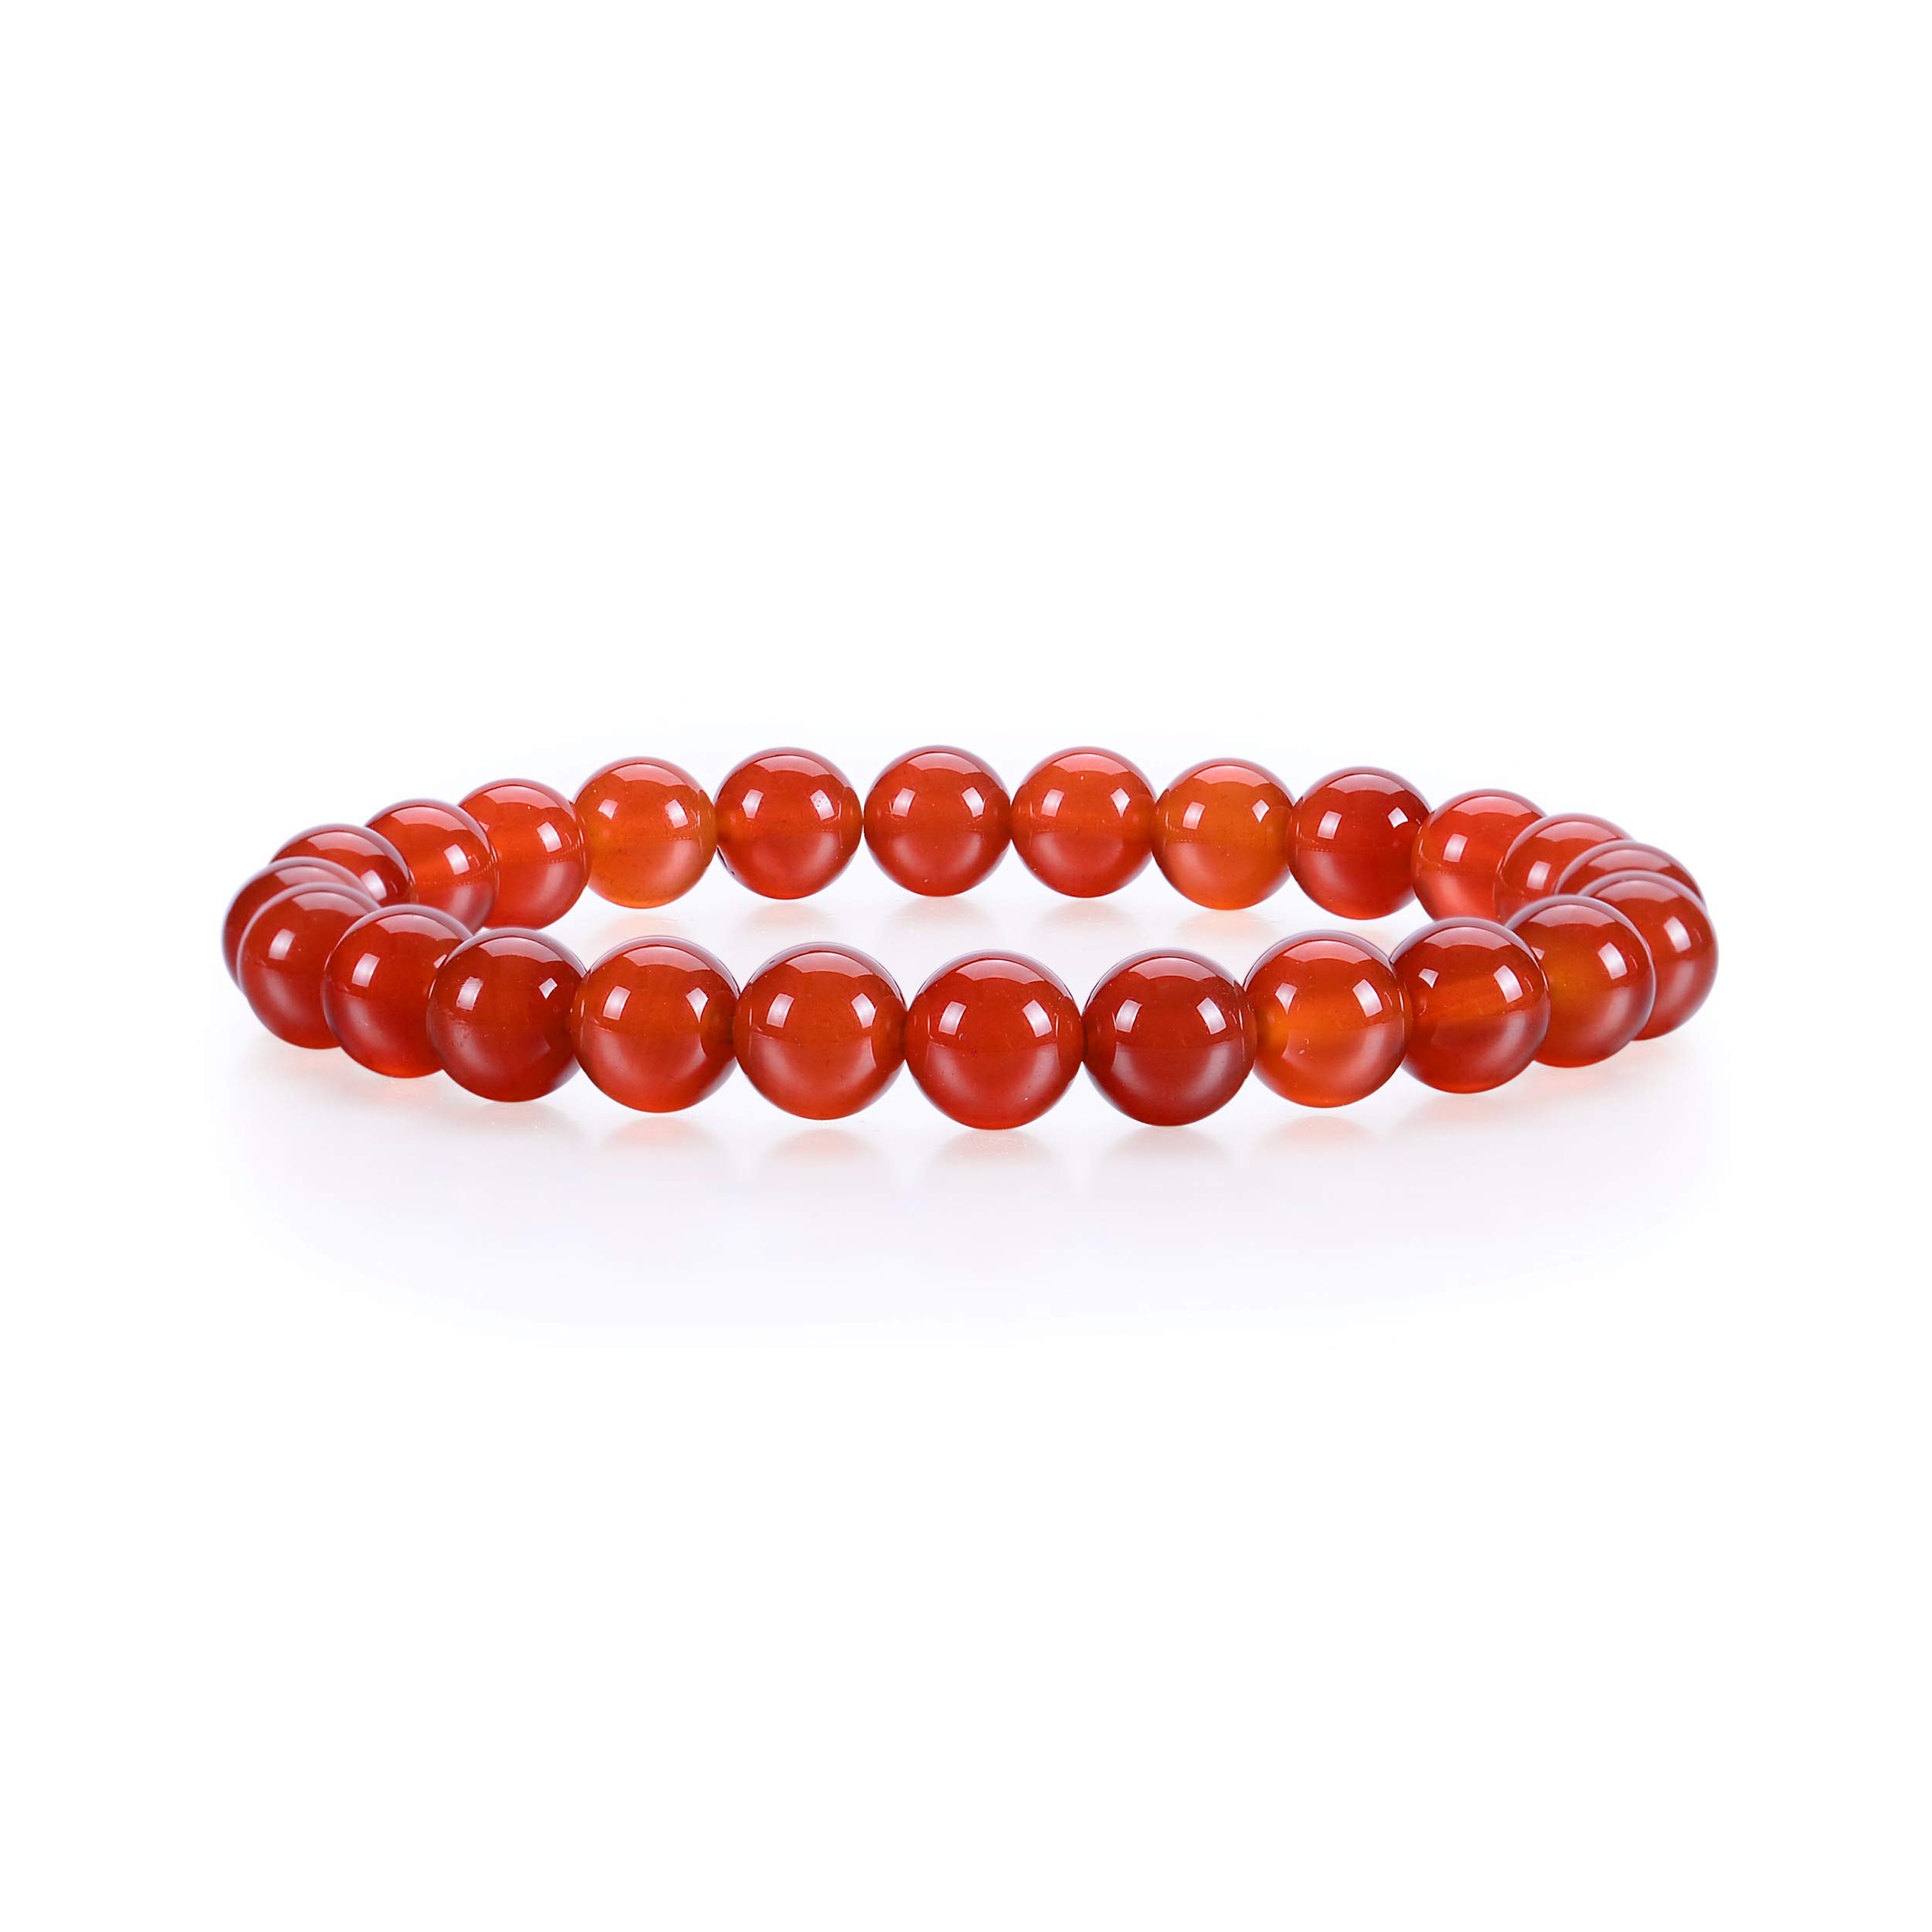 Cherry Tree Collection - Red Agate Bracelet